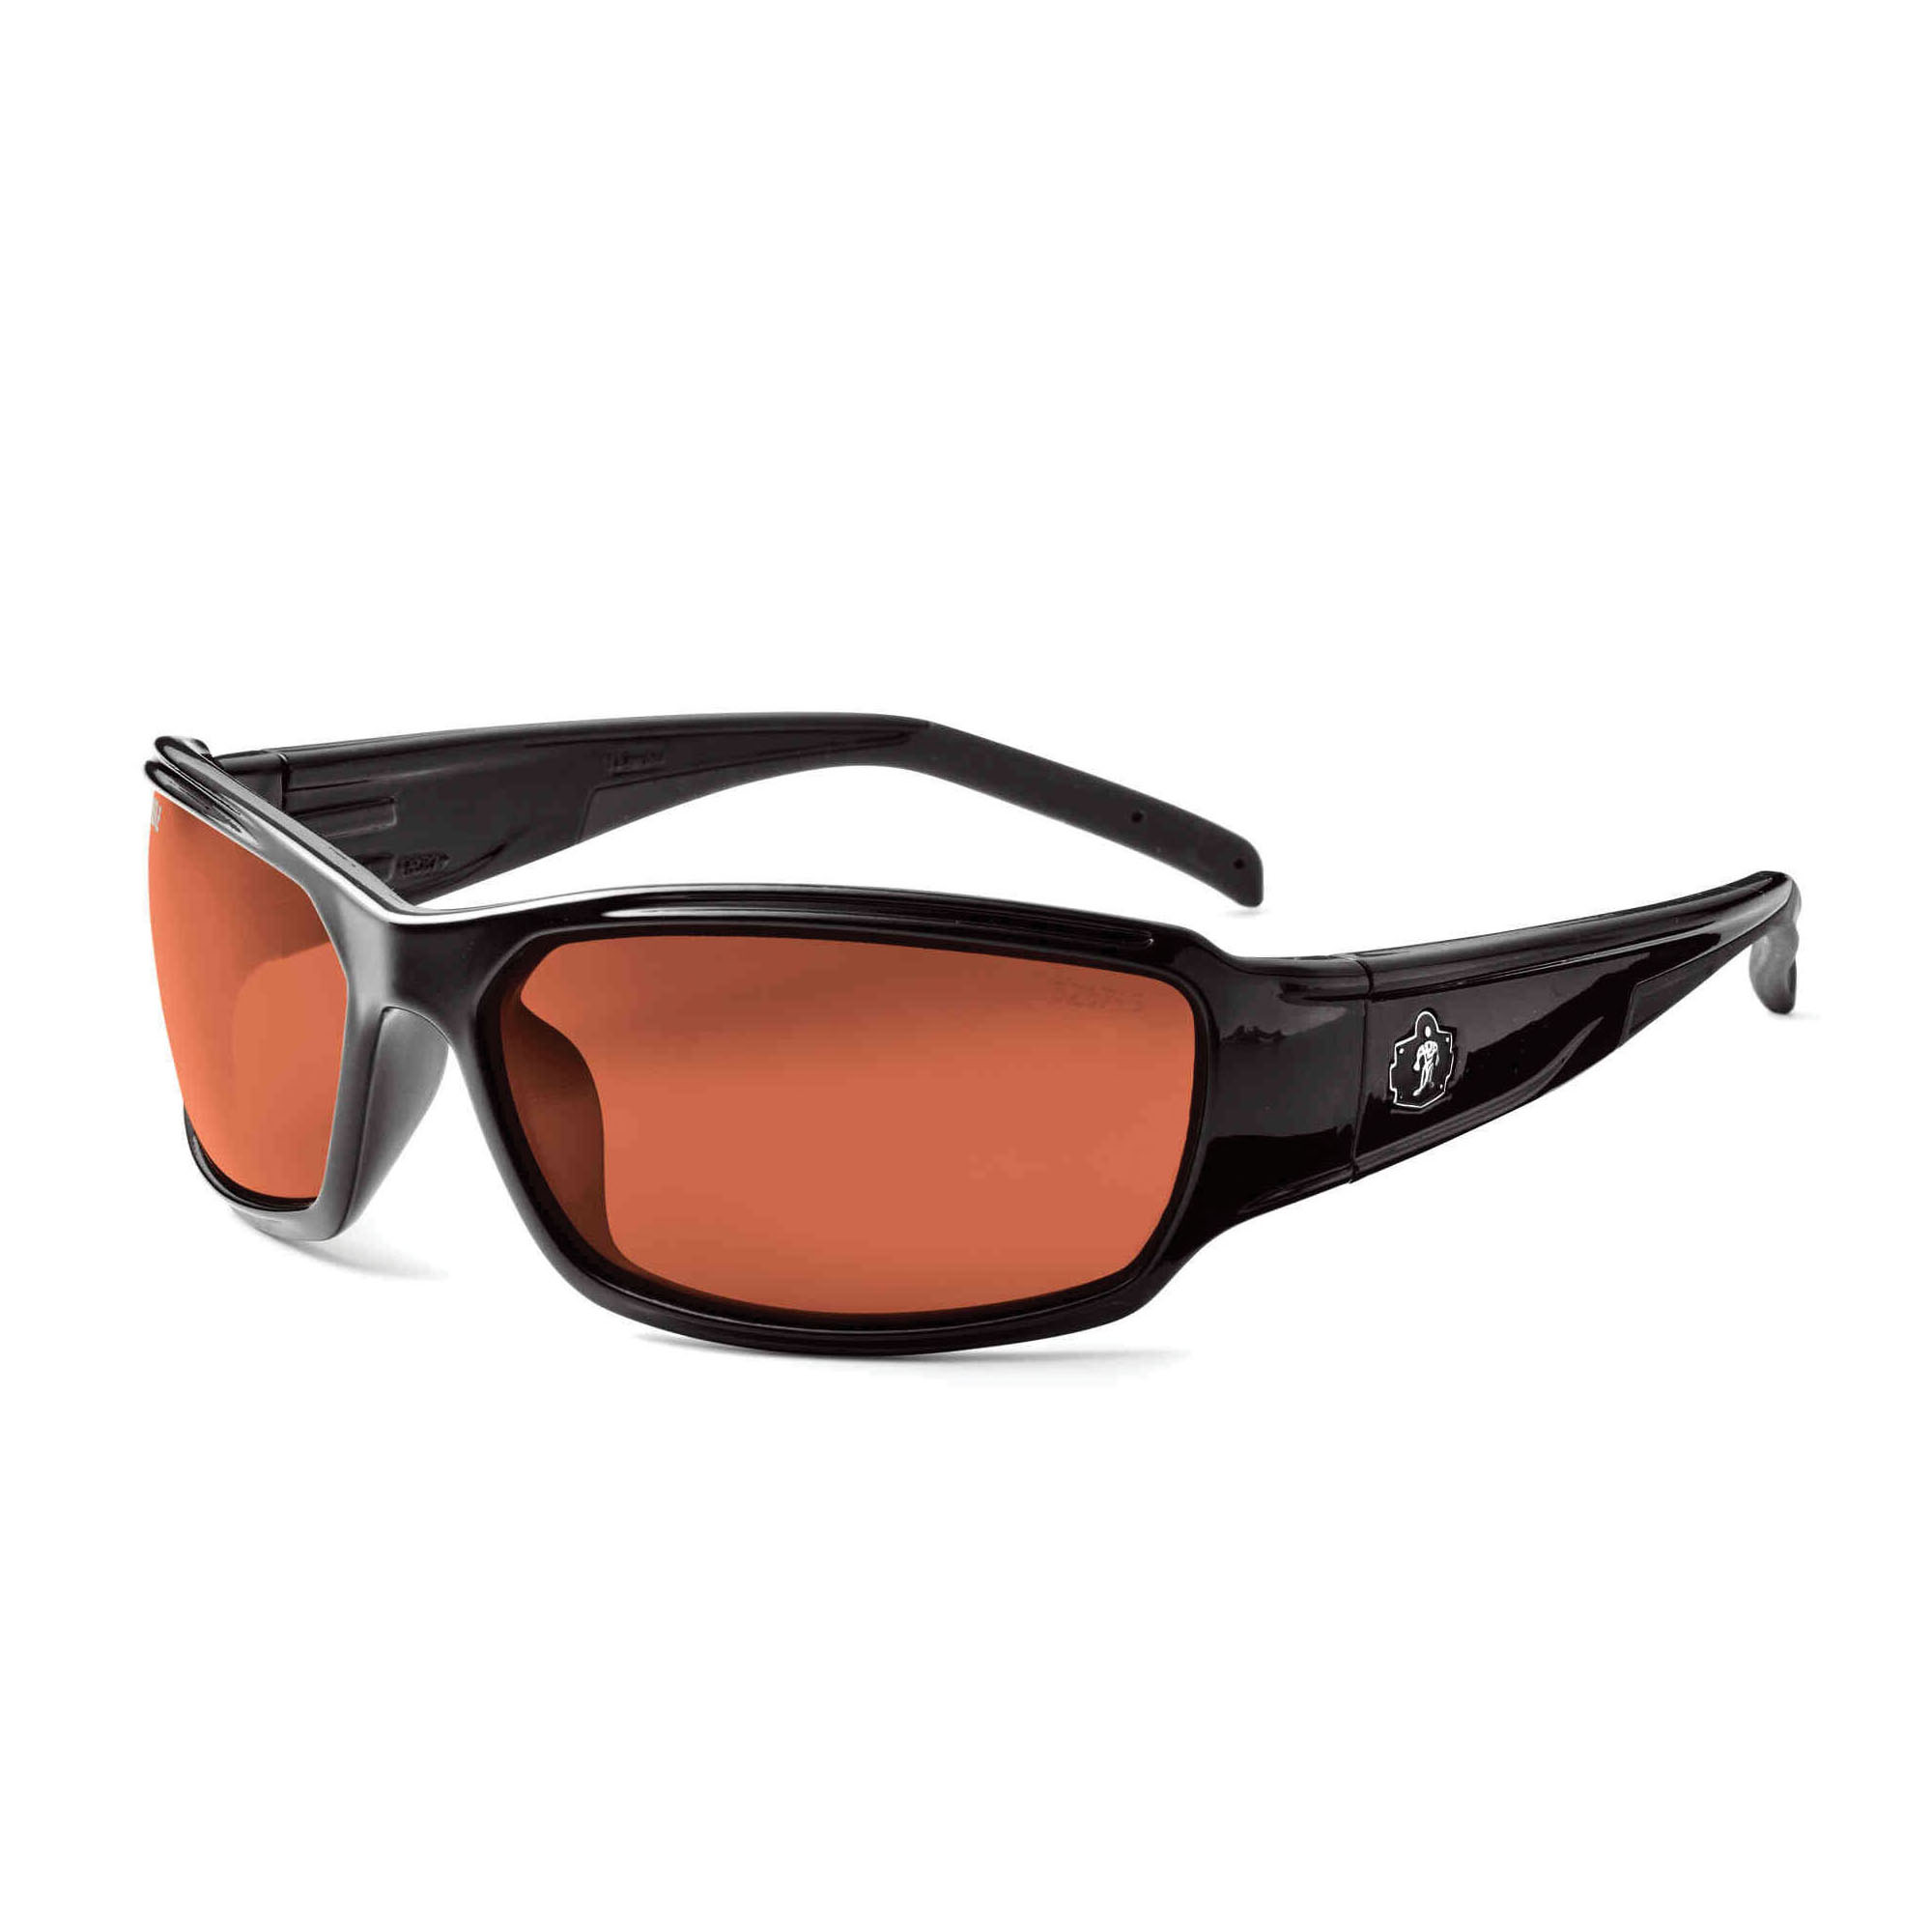 THOR PLRZD COPR SAFETY GLASSES